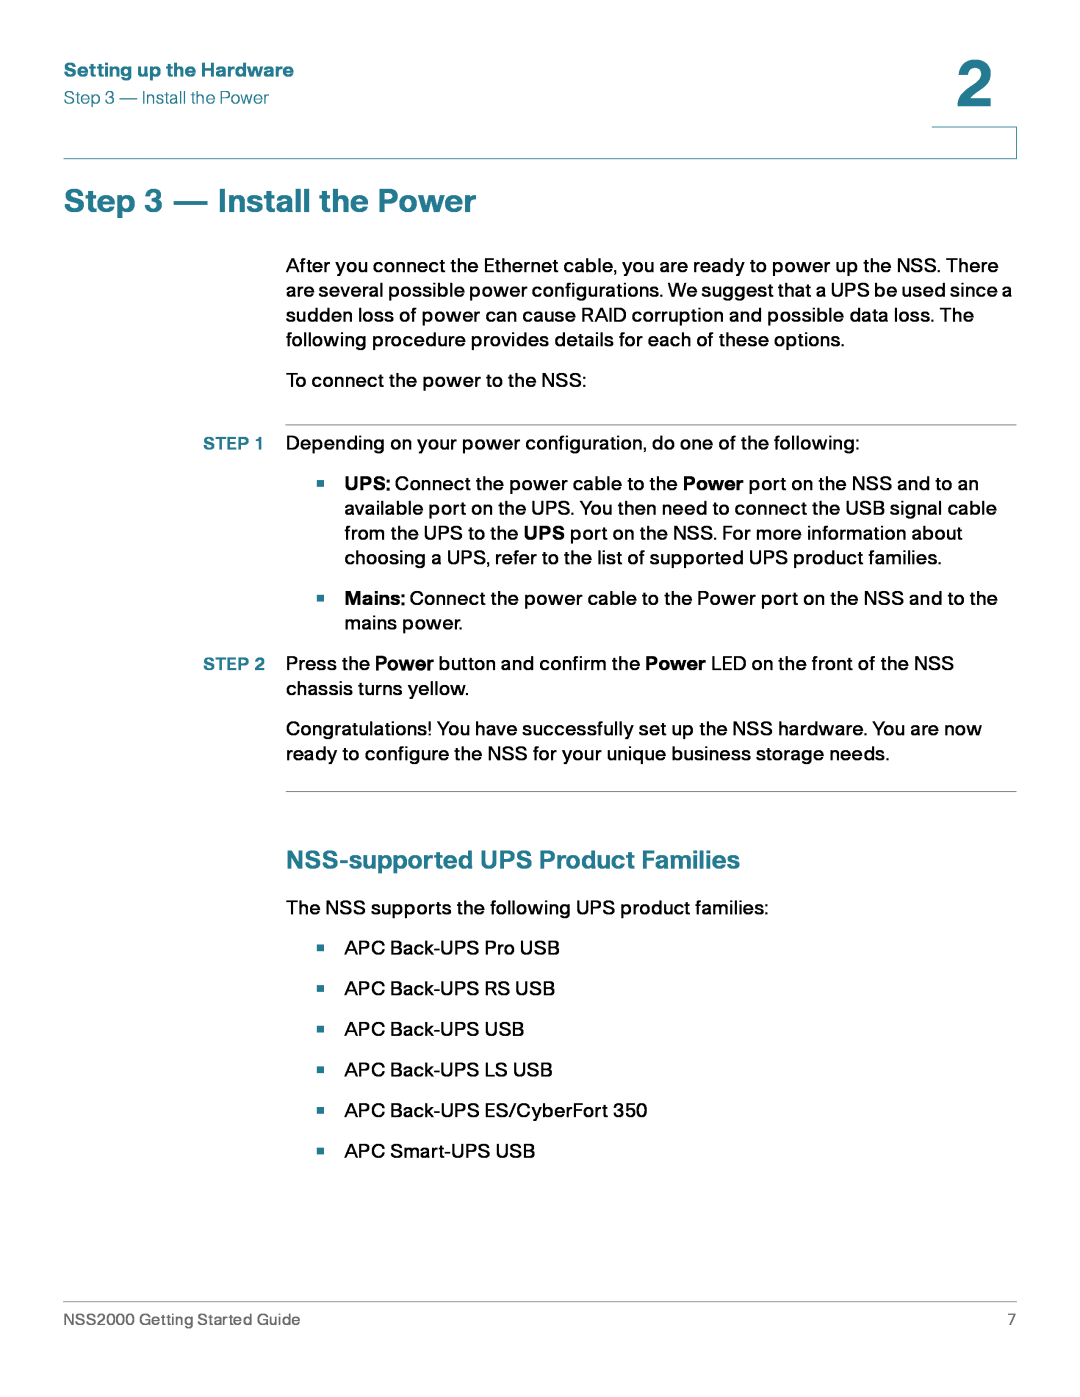 Cisco Systems NSS2000 Series manual Install the Power, NSS-supported UPS Product Families, Setting up the Hardware 